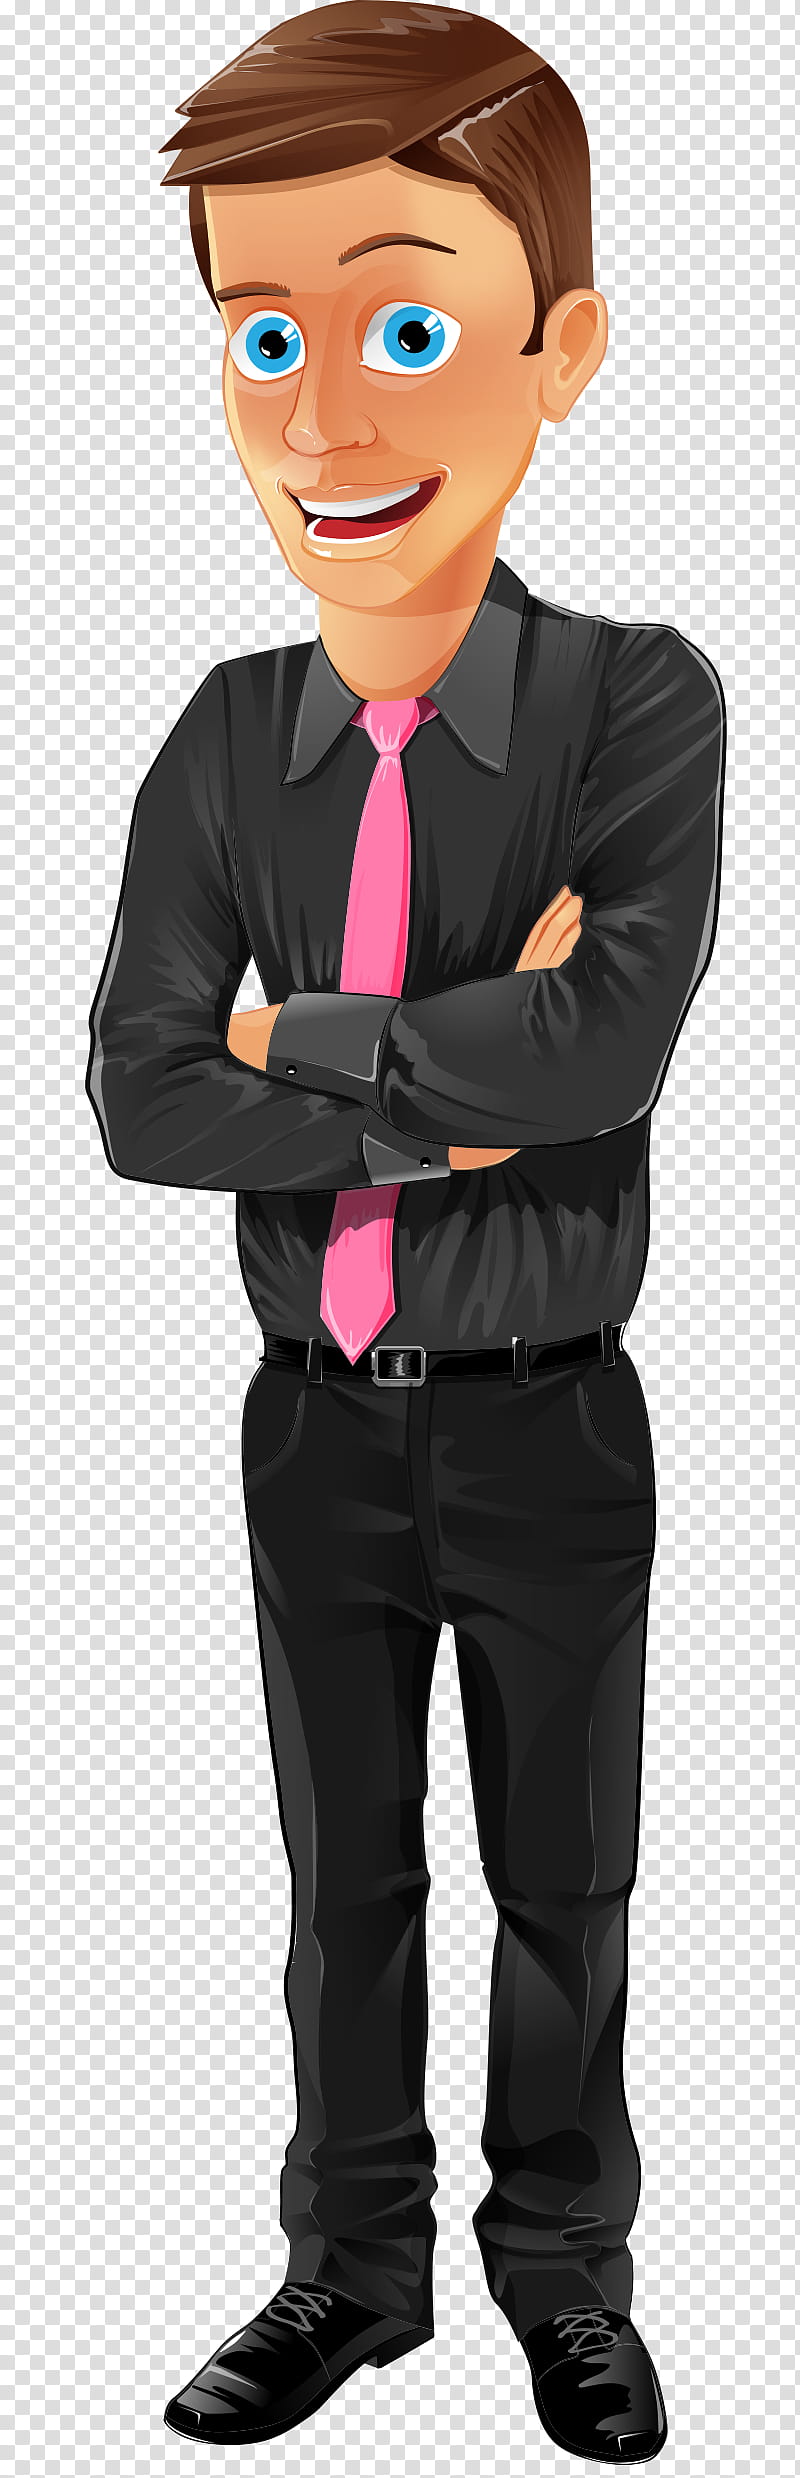 Character Clothing, MICROSOFT OFFICE, Cartoon, Office Assistant, Drawing, Suit, Pink, Sleeve transparent background PNG clipart